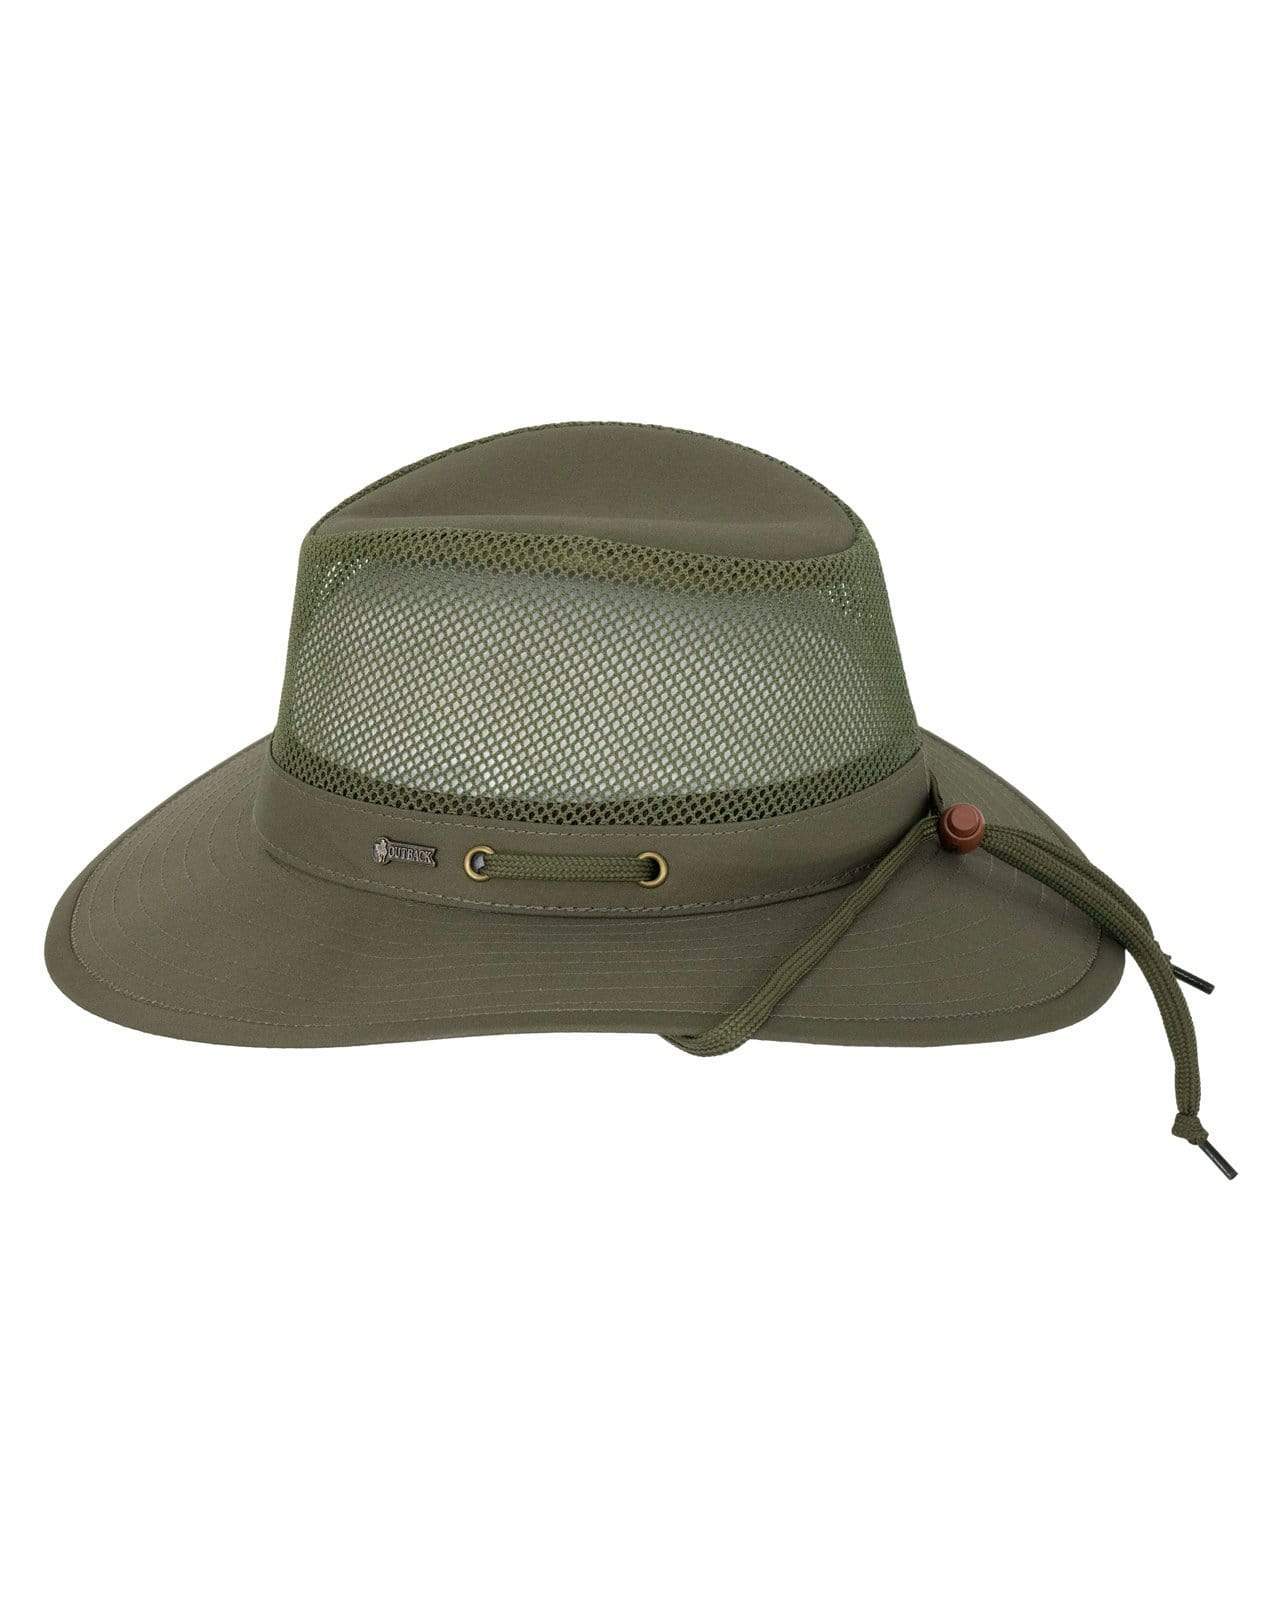 Outback Trading Company River Guide with Mesh II Hats